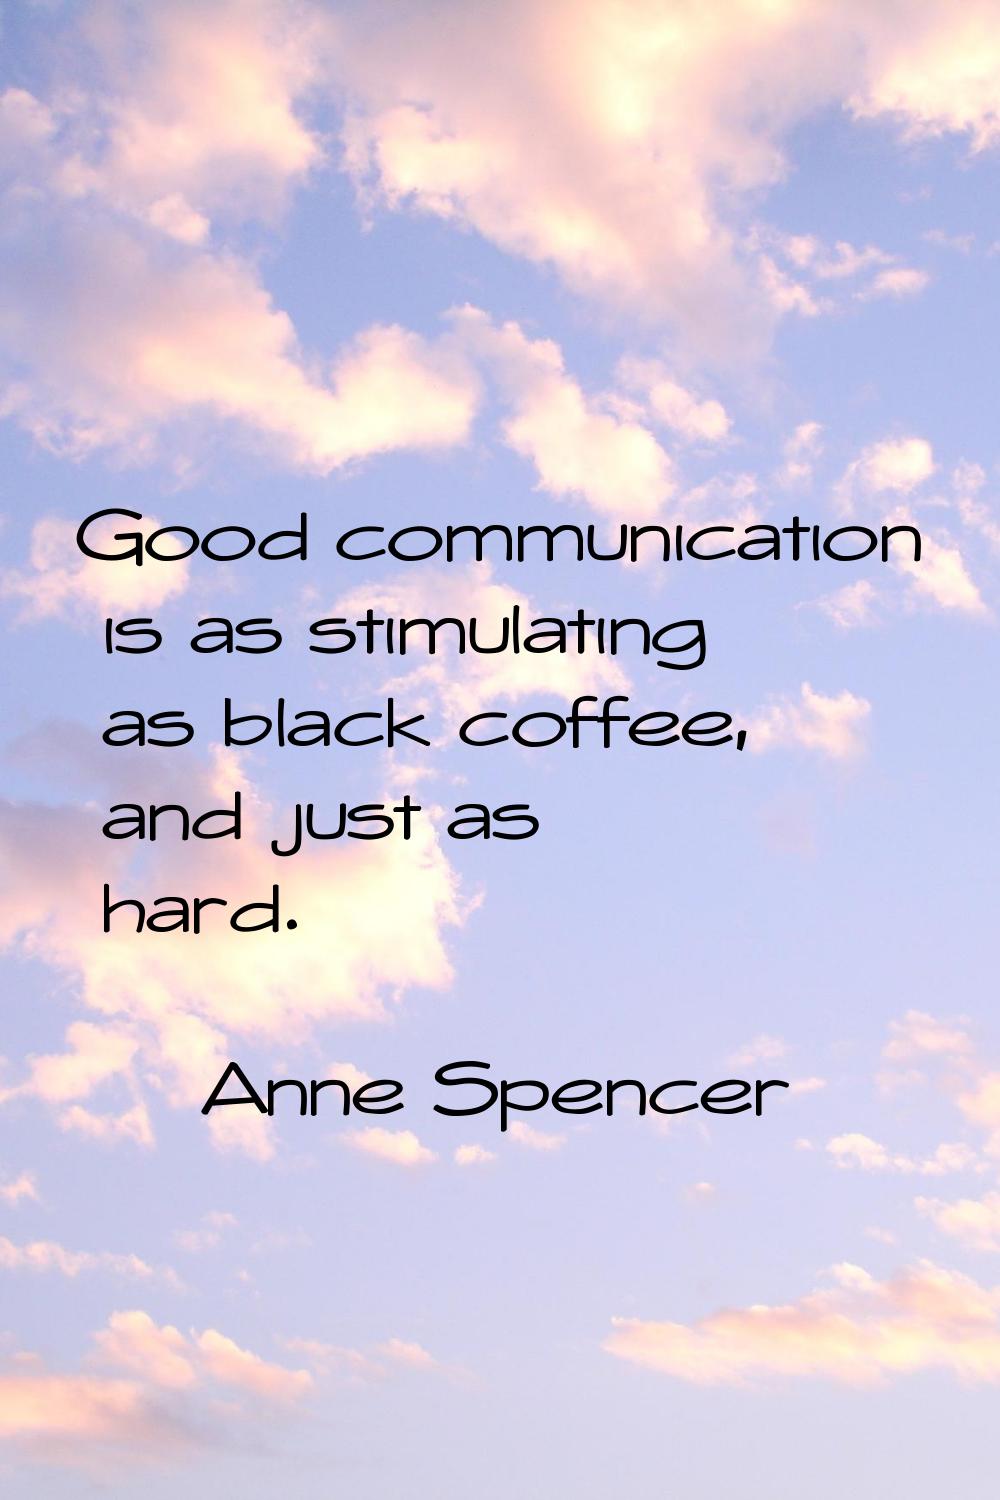 Good communication is as stimulating as black coffee, and just as hard.